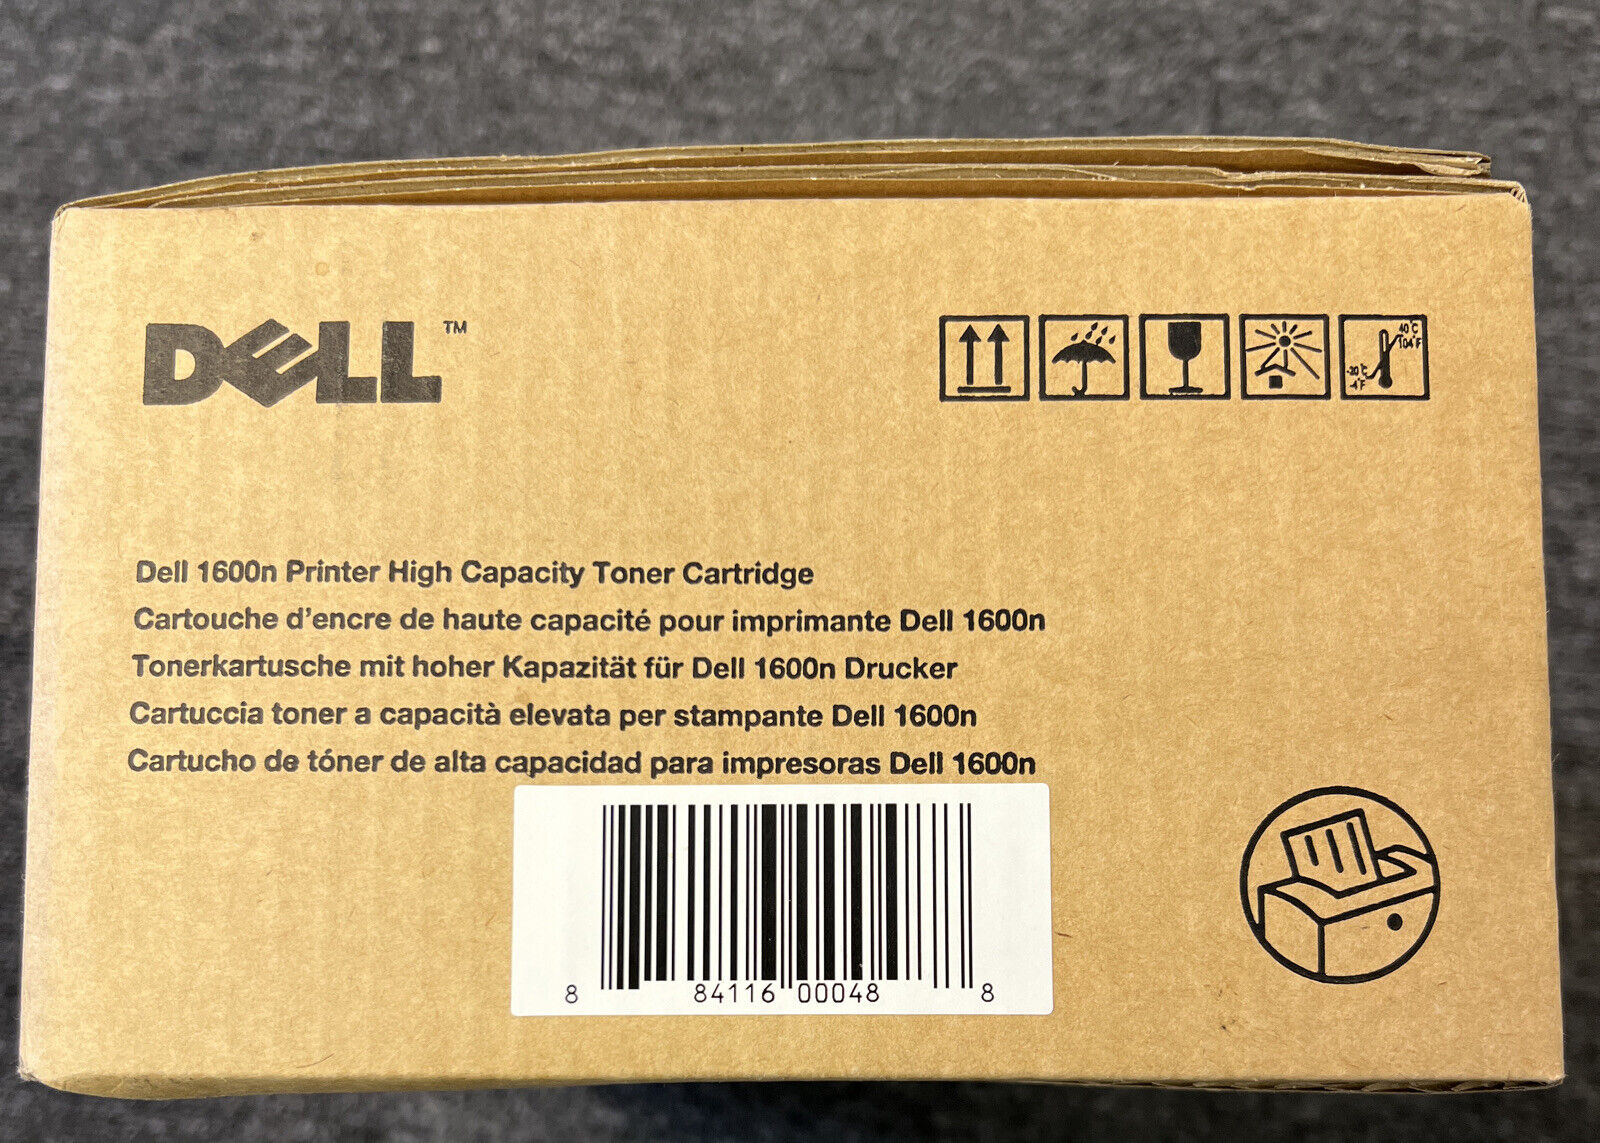 Genuine Dell 1600n 5000 pages Black High Yield Toner Cartridge